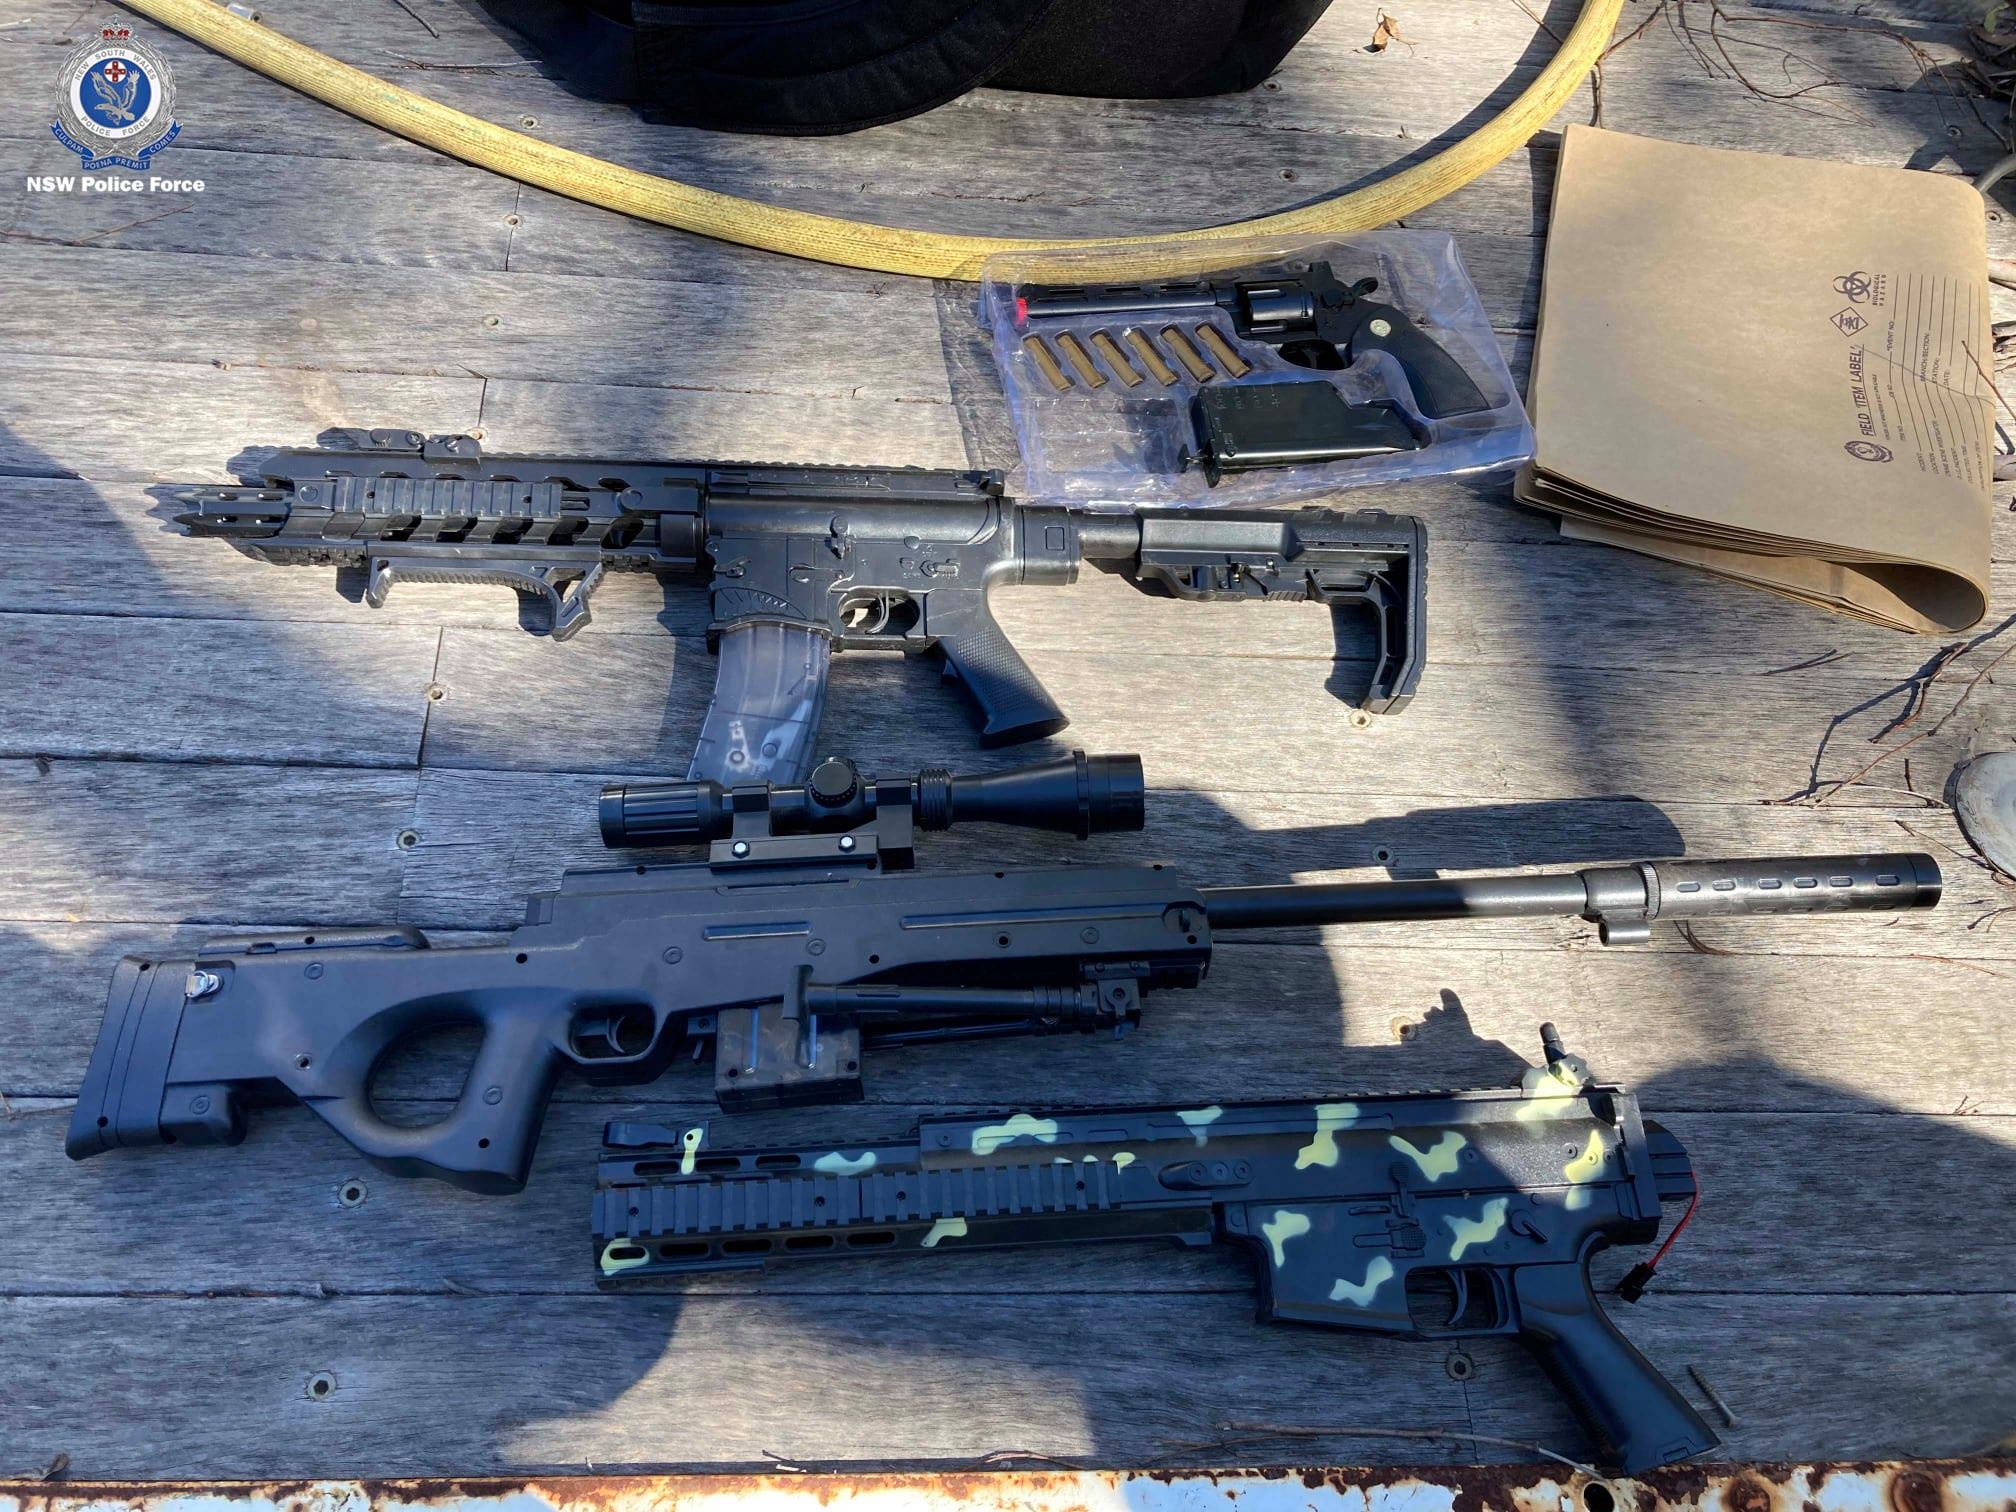 Guns, bikes, trailers and a sick pig: police seize items worth more than $500,000